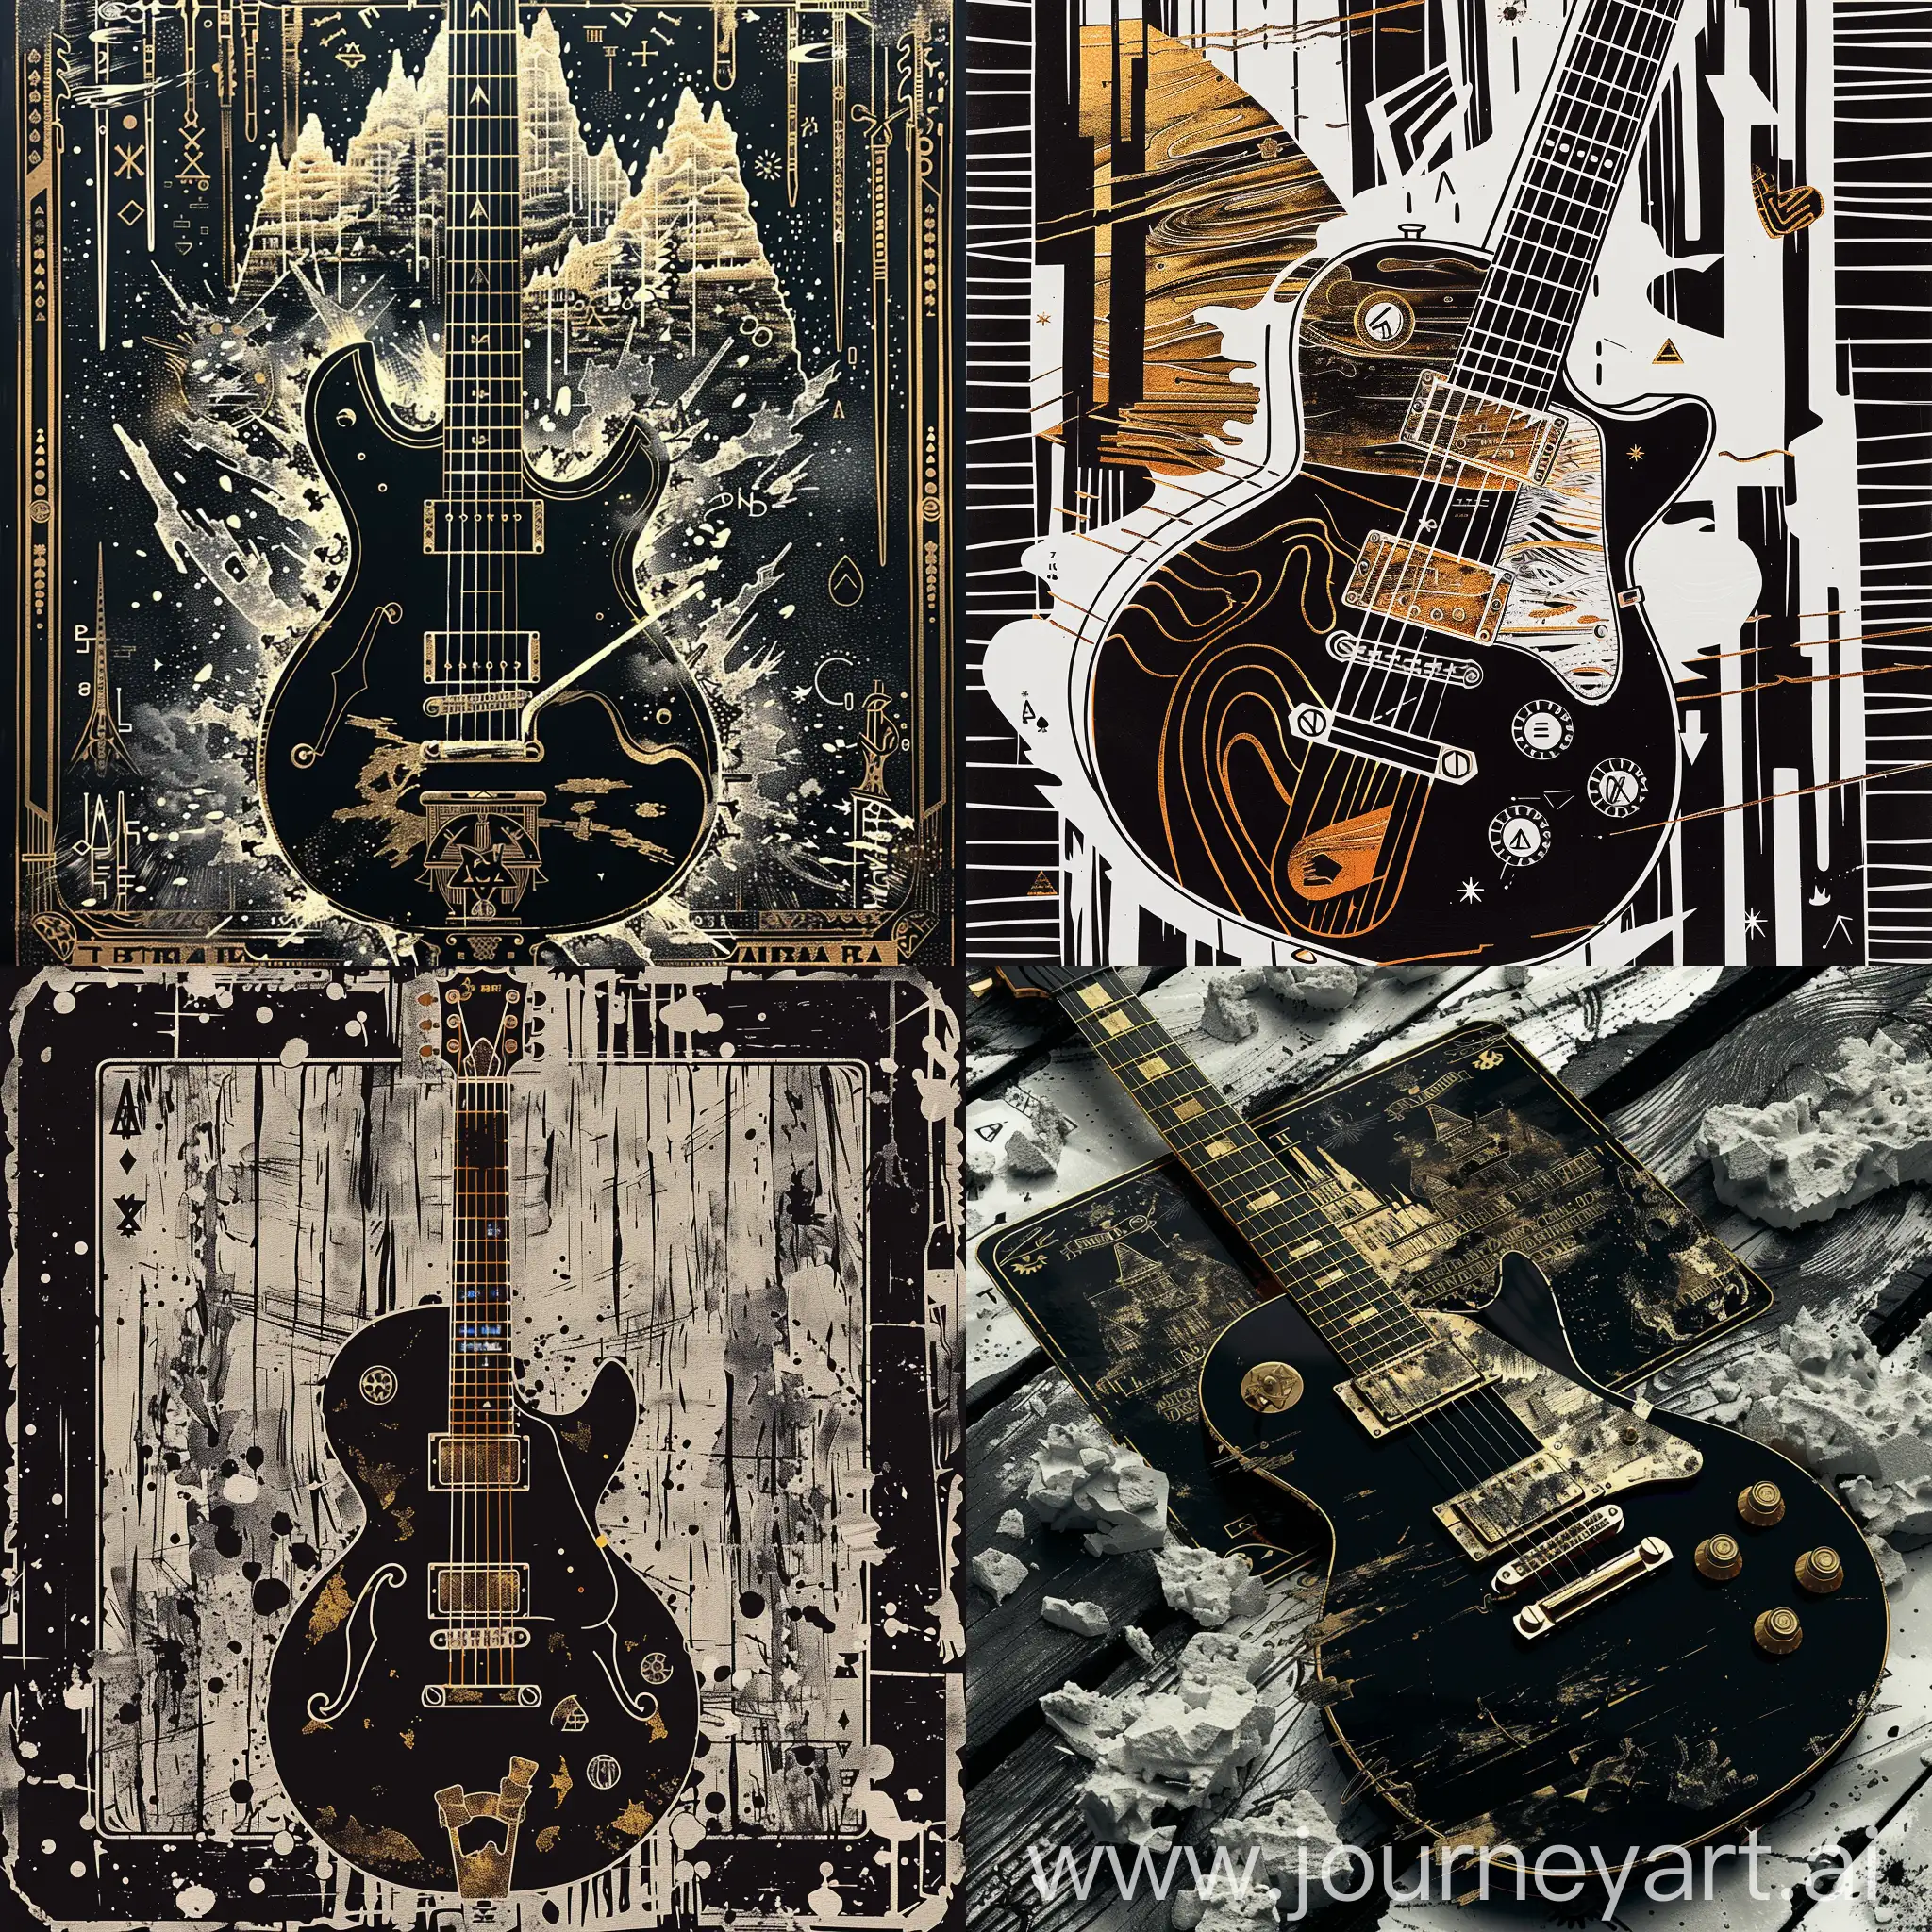 Black guitar a graphic rock-albumn inspired composition, black and white with gold foil, tarot card, apocalypse art, woodcut, cryptic psychedelia, playing card design, collaborative activism, vintage poster style